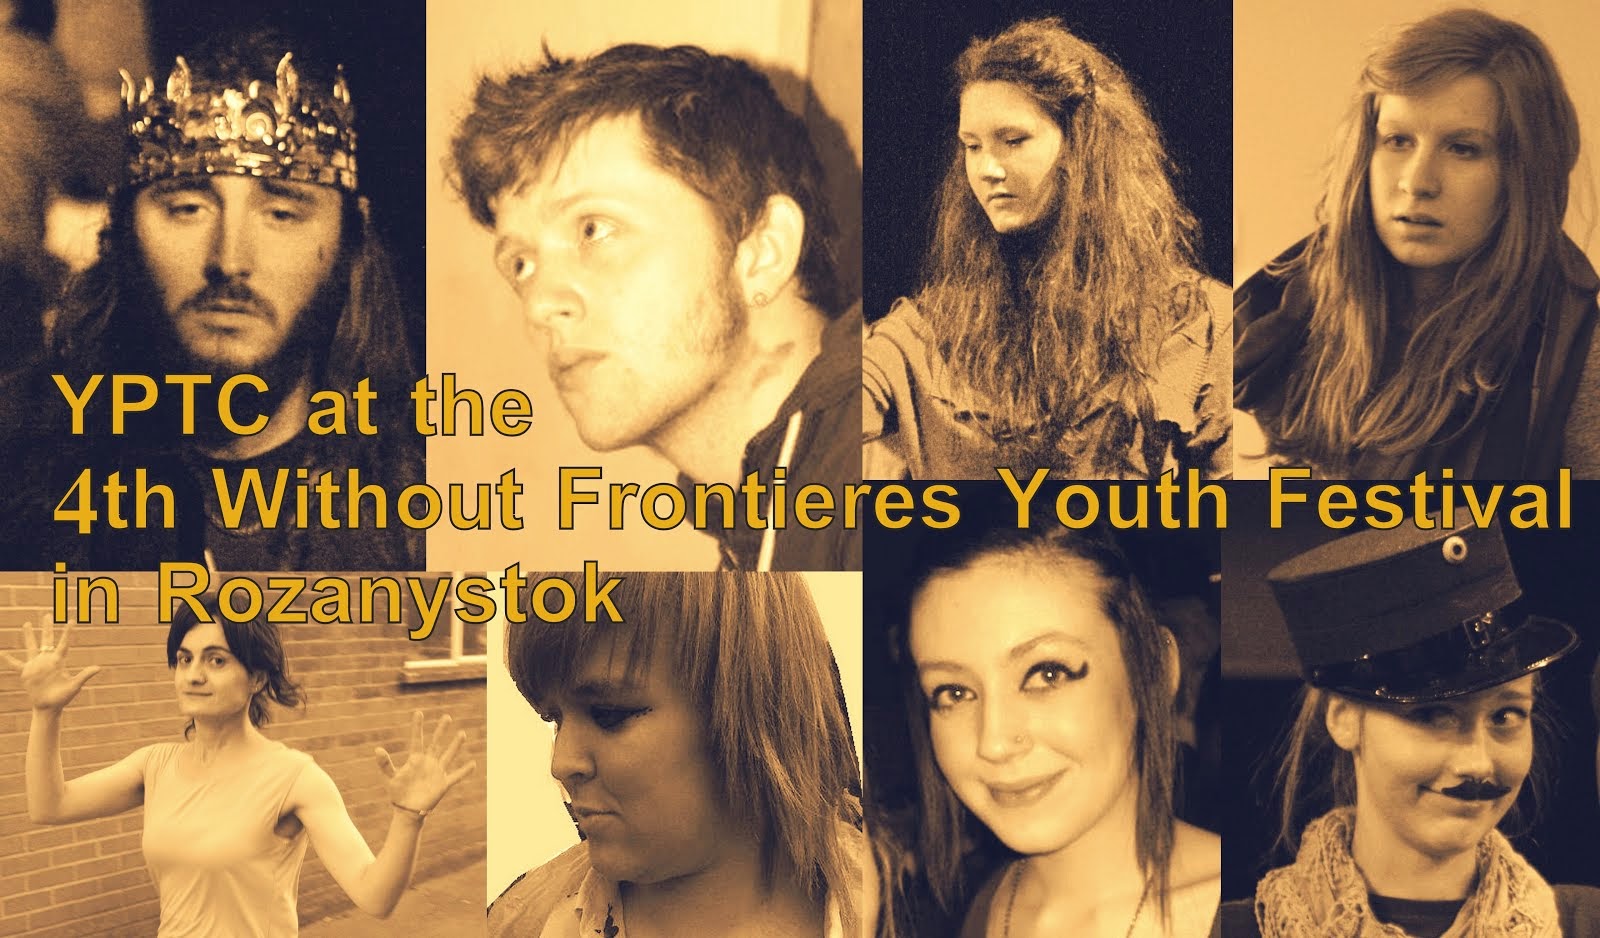 YPTC at the 4th 'Without Frontiers Youth Festival' in Różanystok